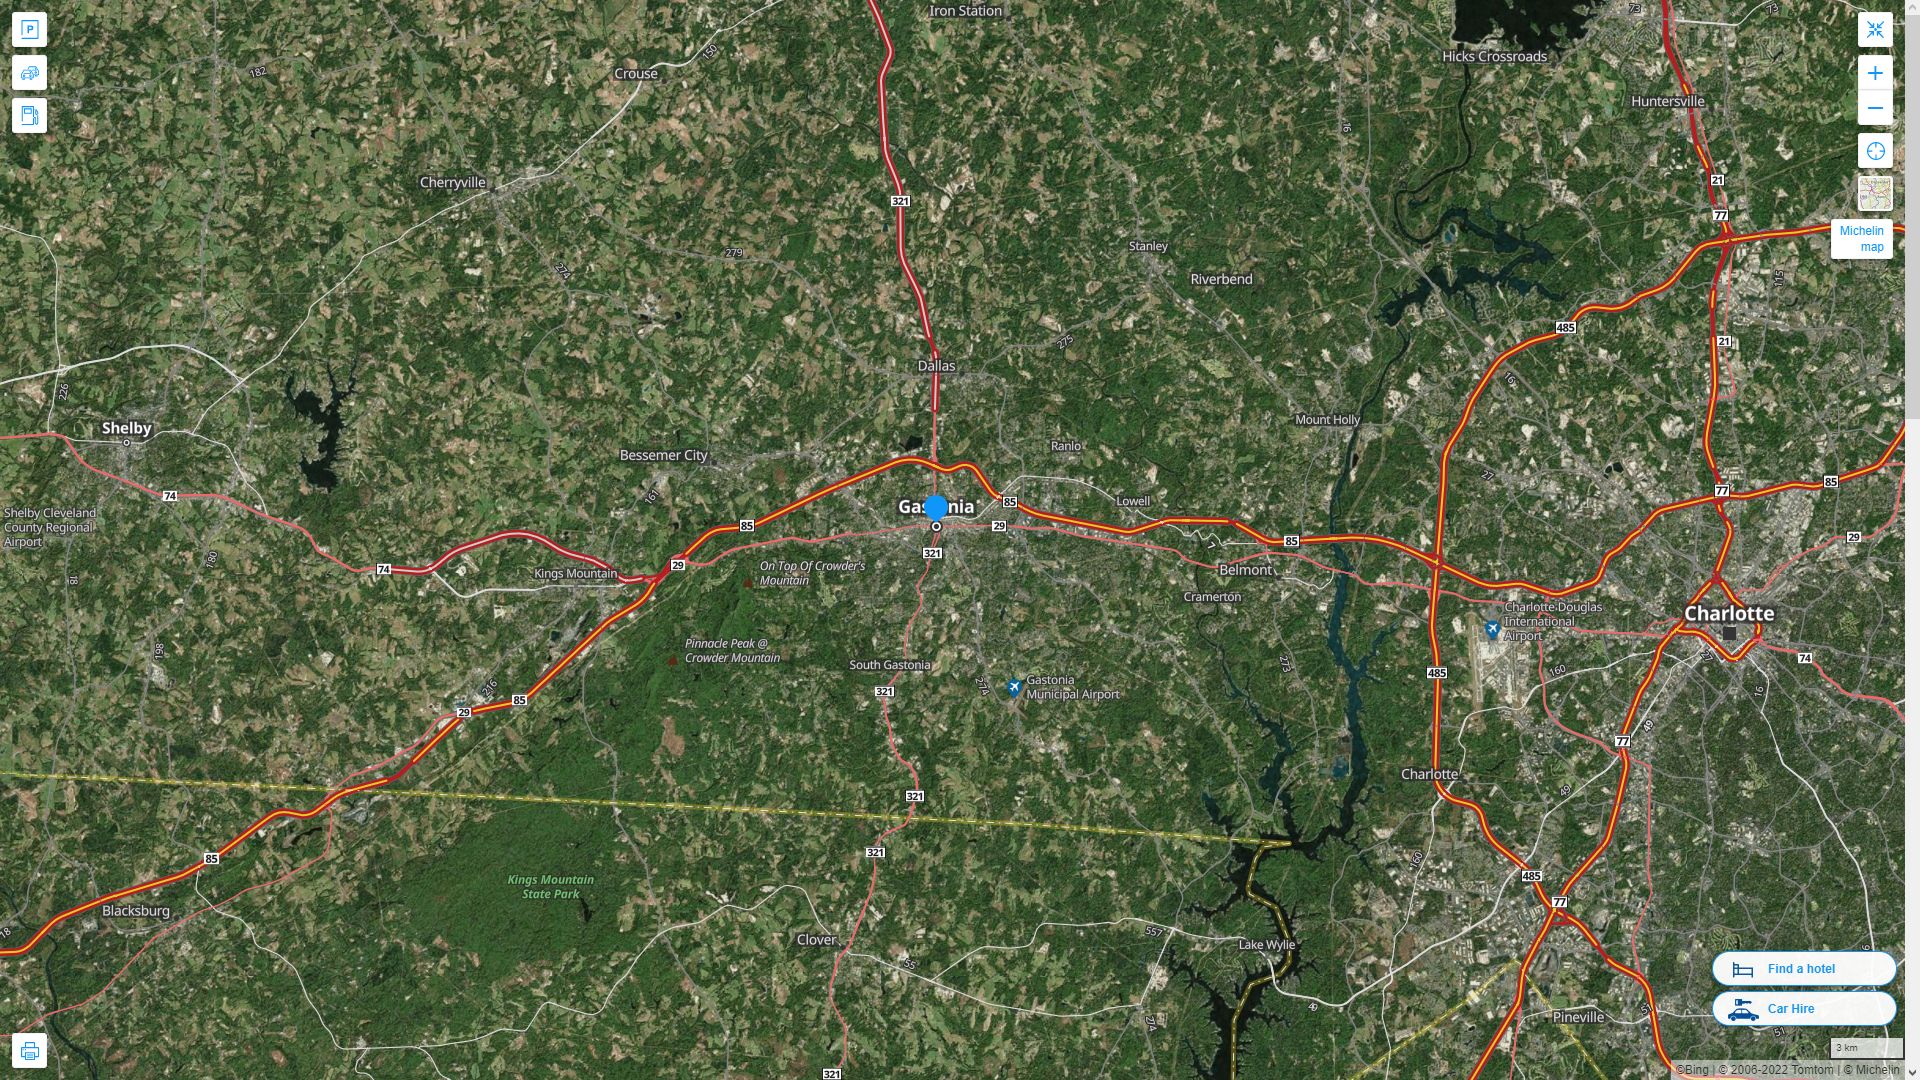 Gastonia North Carolina Highway and Road Map with Satellite View